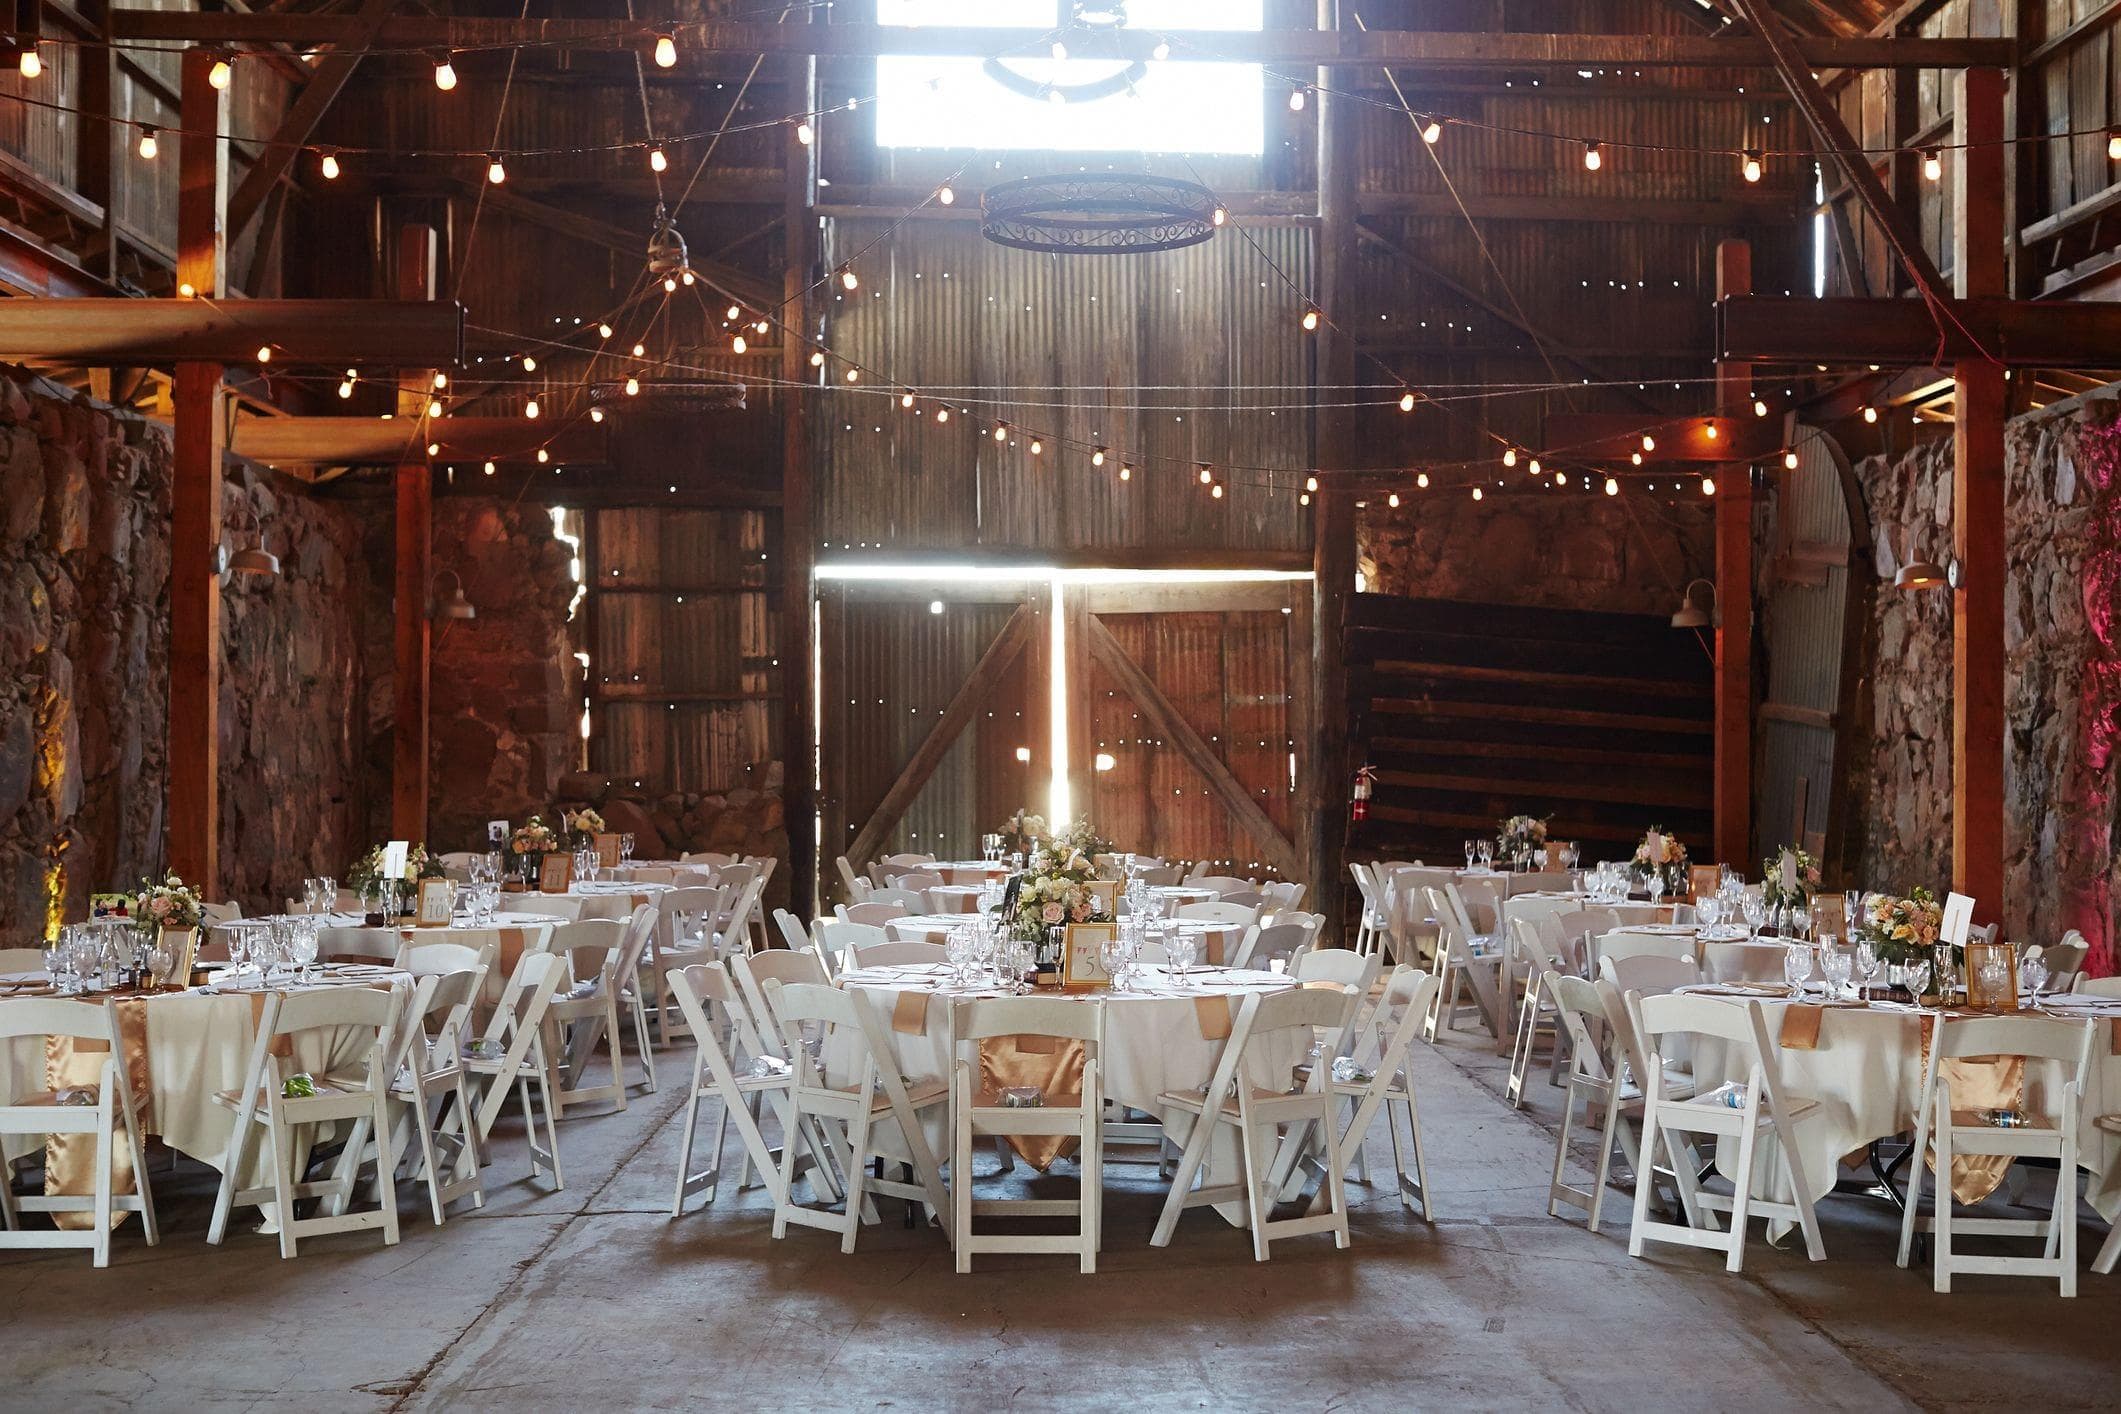 gorgeous wedding venue set up inside of barn event space